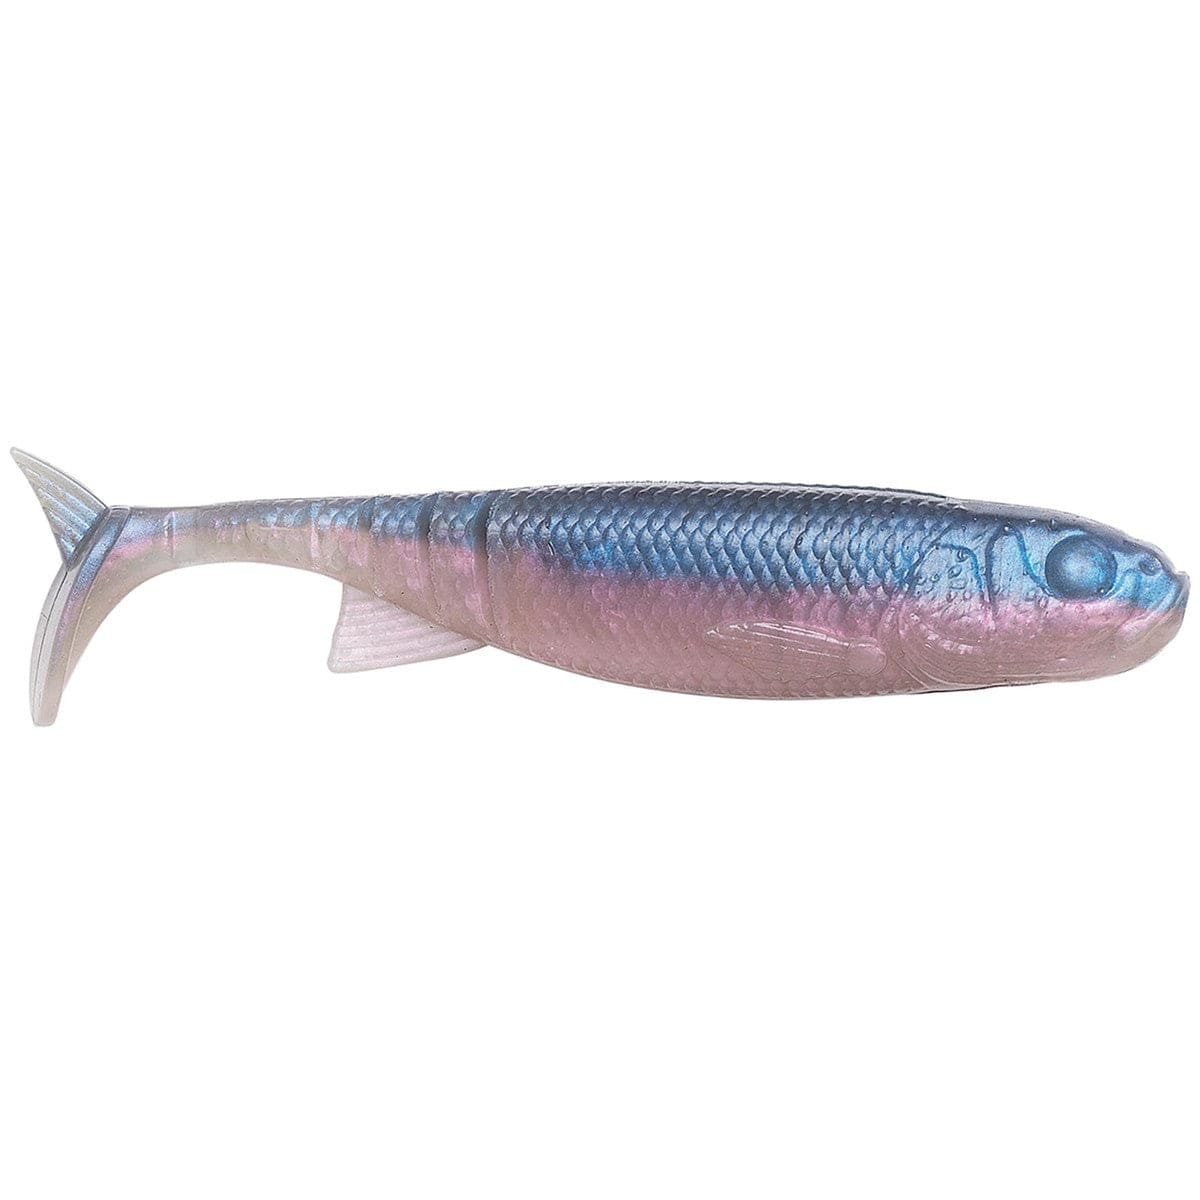 Savage Gear 4111 DuraTech Minnow 4 lb Pro Blue Red Pearl 4 PC